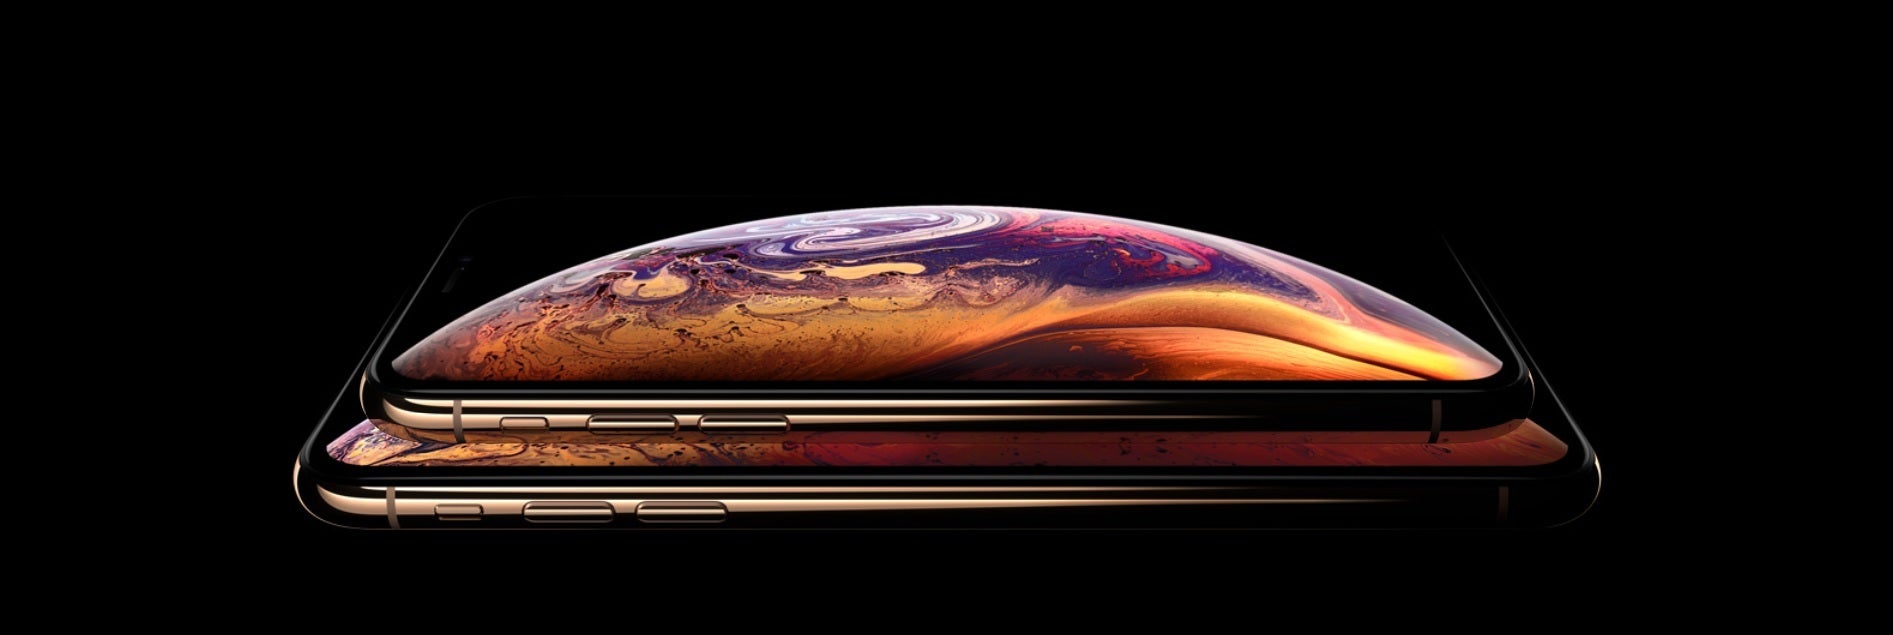 The Apple iPhone XS and iPhone XS Max require more factory workers to build than the iPhone X - Apple and Foxconn broke Chinese labor law says advocacy group